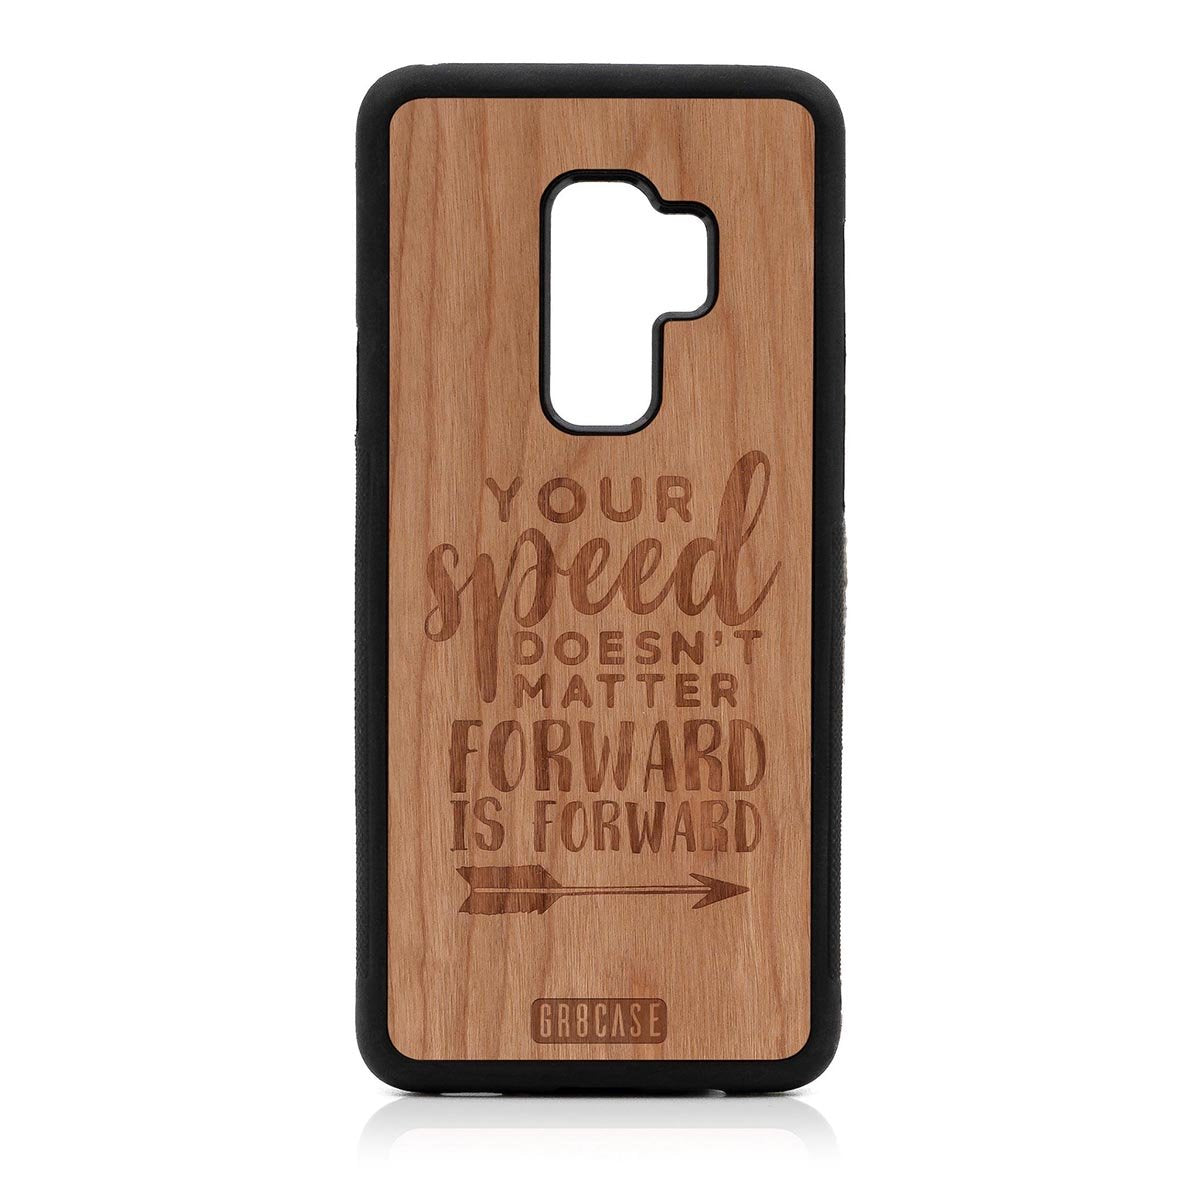 Your Speed Doesn't Matter Forward Is Forward Design Wood Case Samsung Galaxy S9 Plus